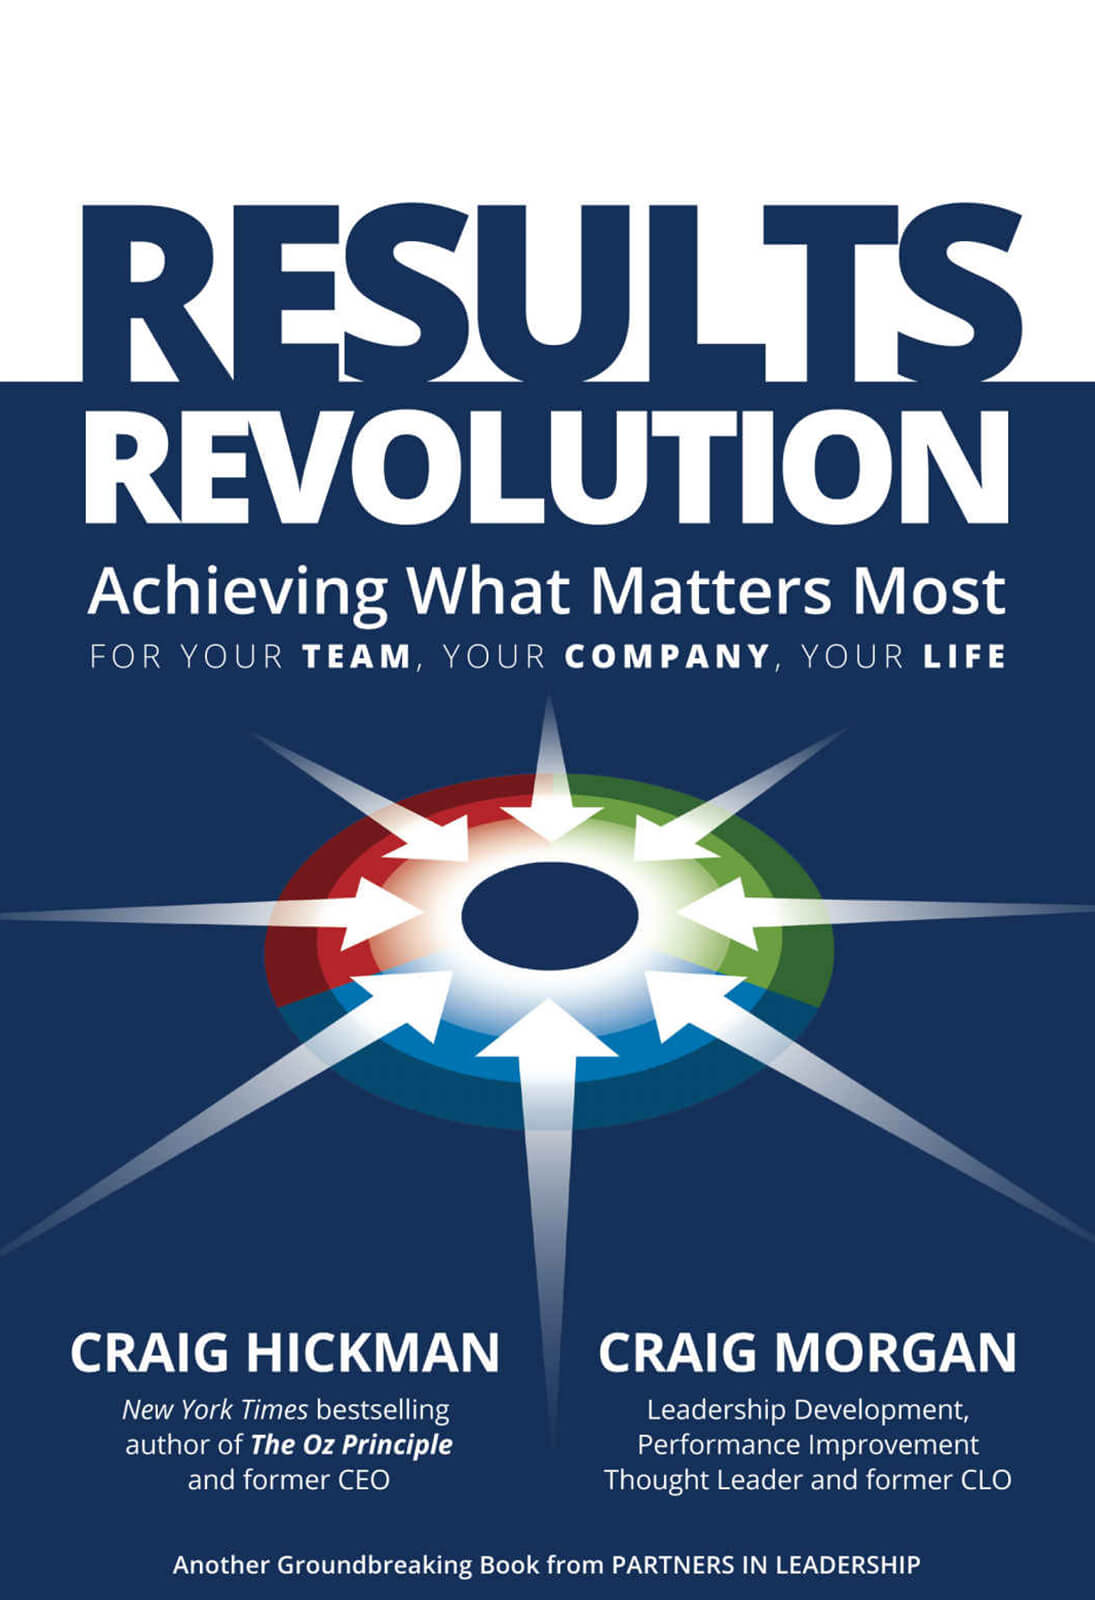 Results Revolution: Achieving What Matters Most Your Team, Your Company, Your Life